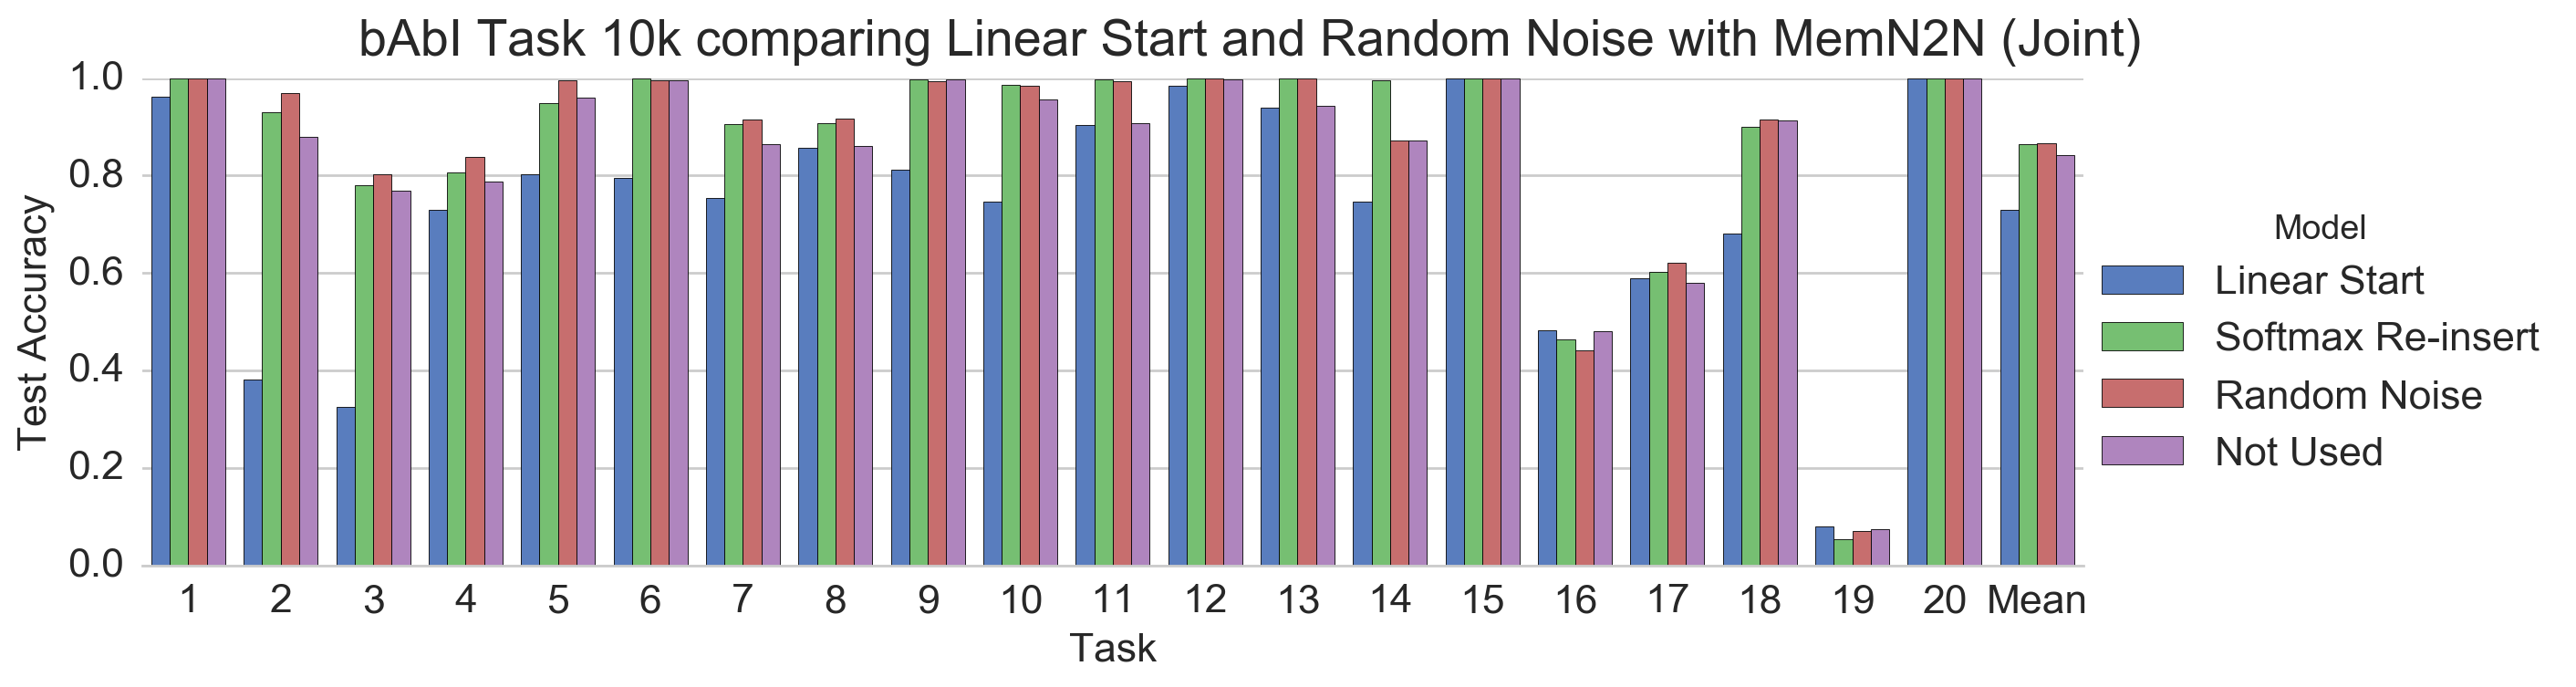 bAbI Task 10k comparing Linear Start and Random Noise with MemN2N (Joint)